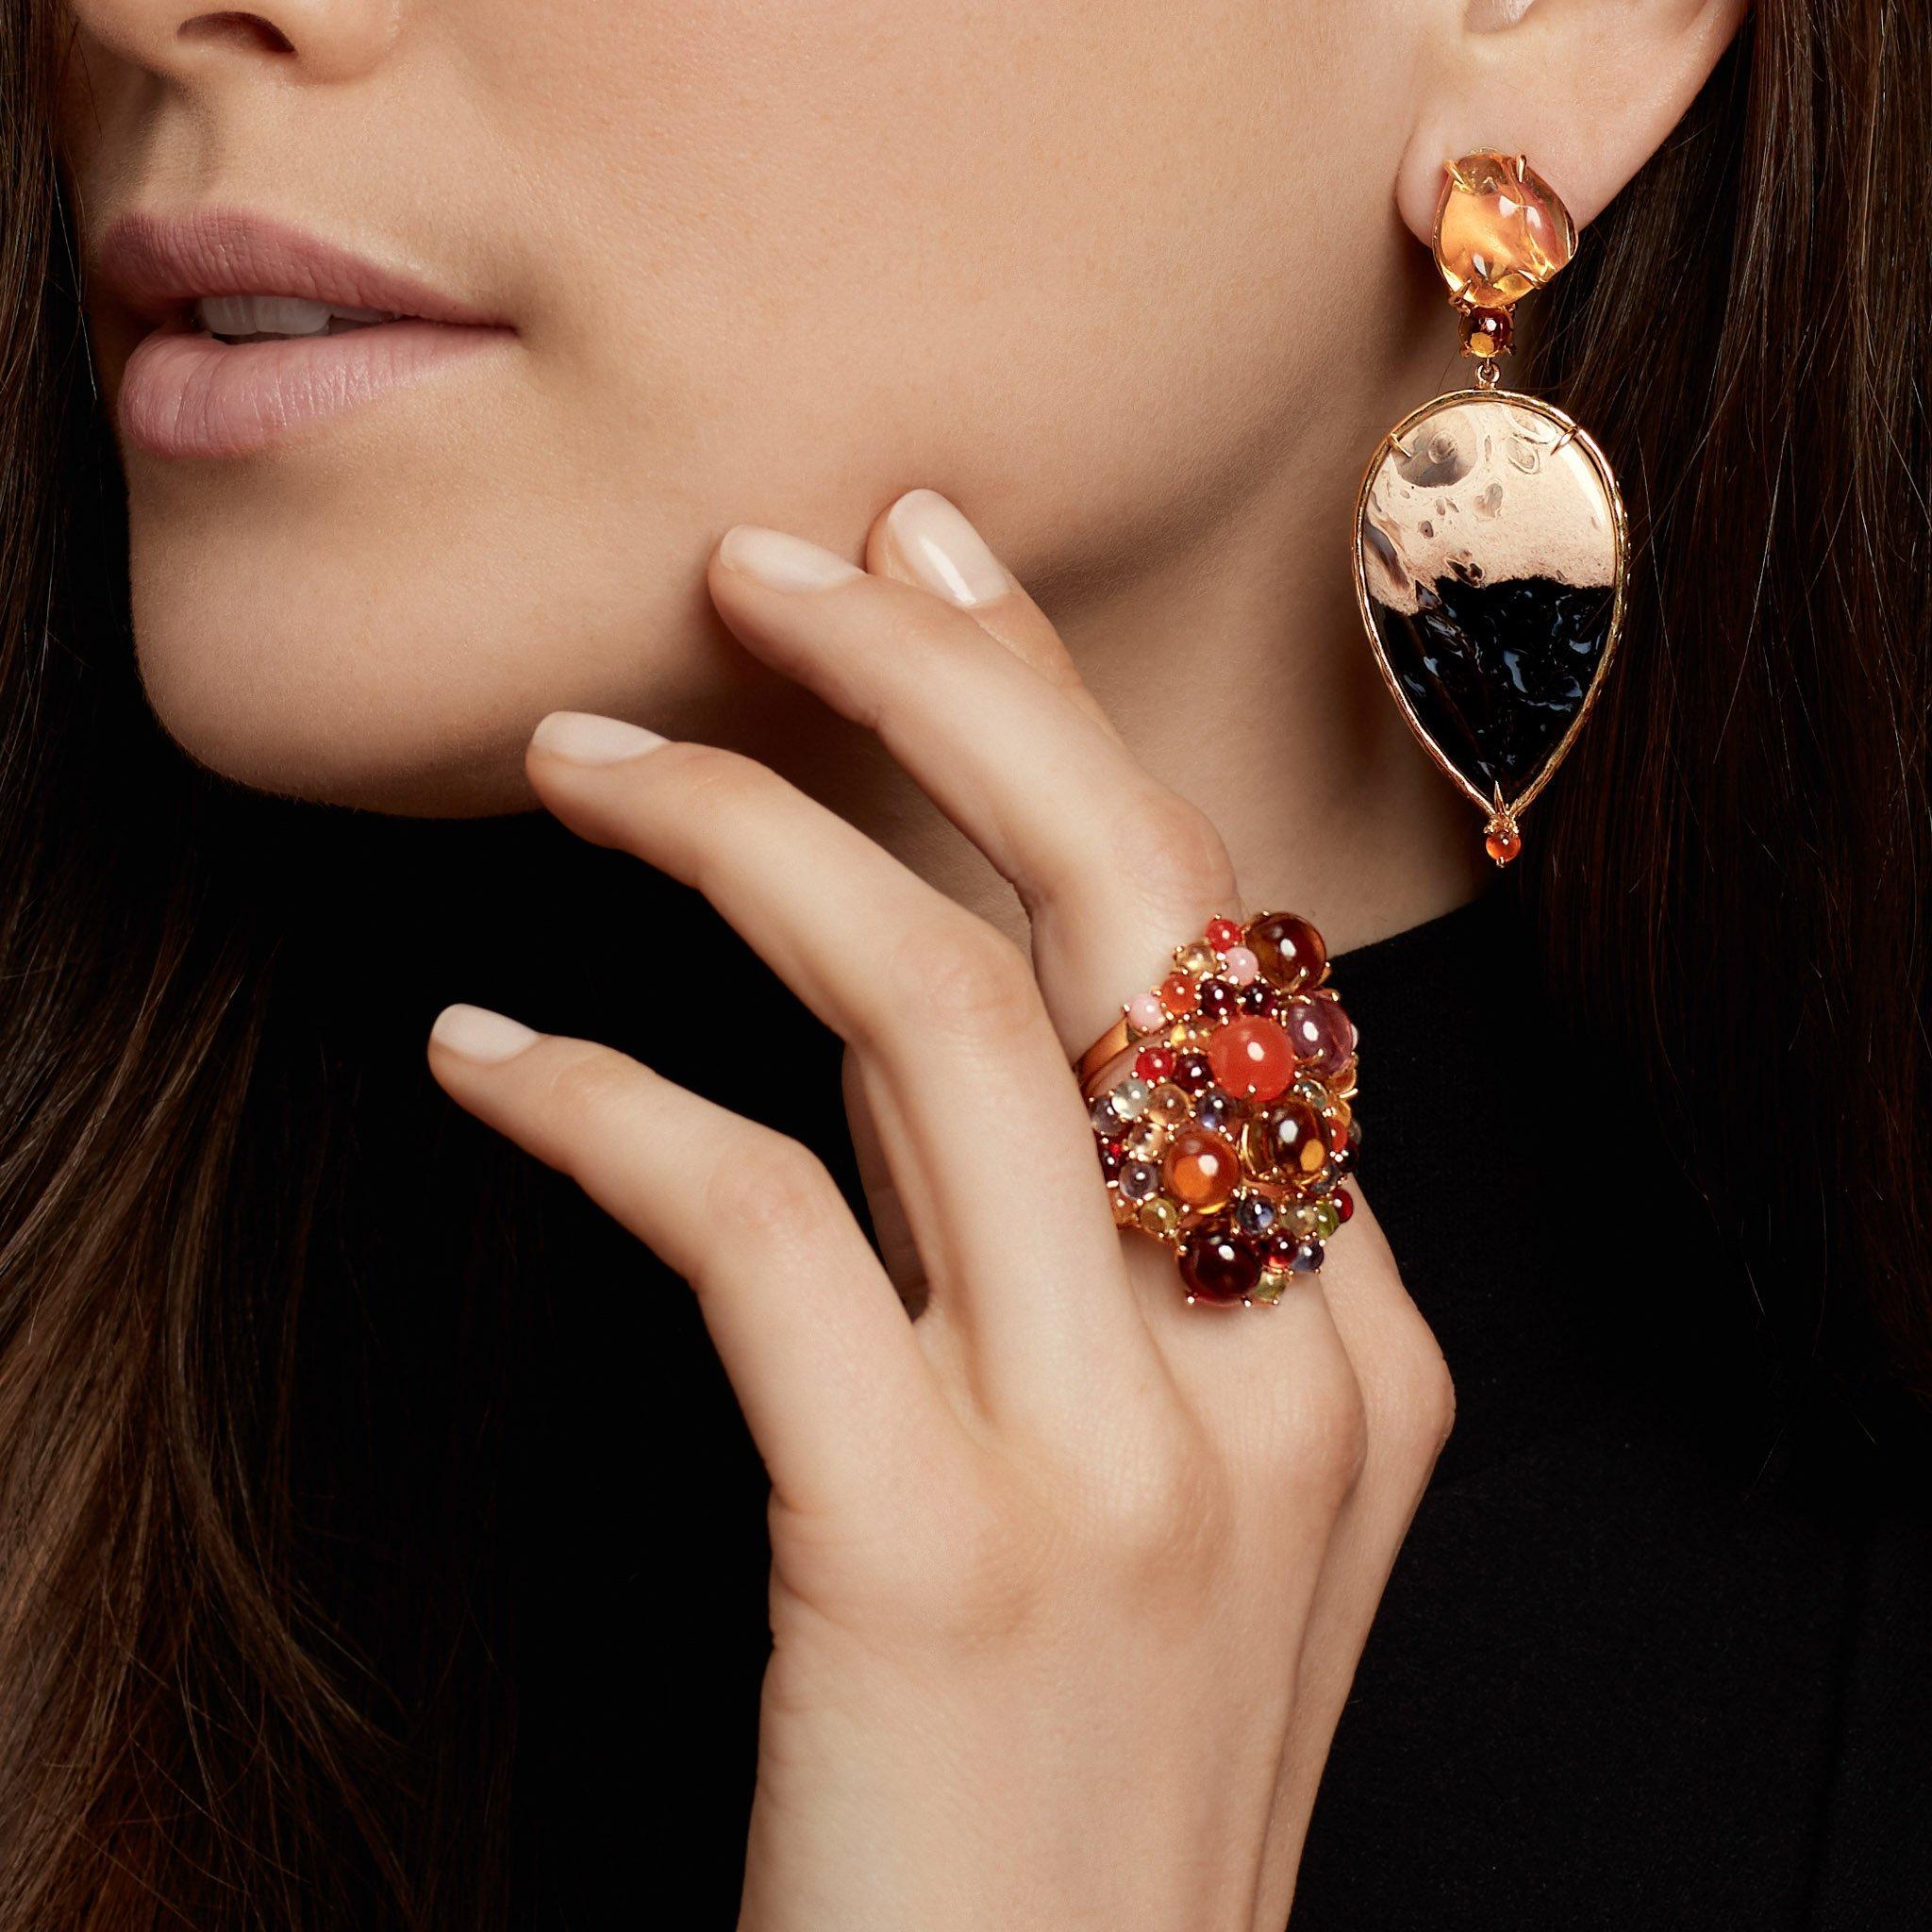 Stunning when stacked, yet striking on their own as singles. The Dagny Ring is offered in an array of mouthwatering stones – shown here with cabochons of yellow citrine and pink tourmaline with medley sides of pink opal, carnelian, citrine,